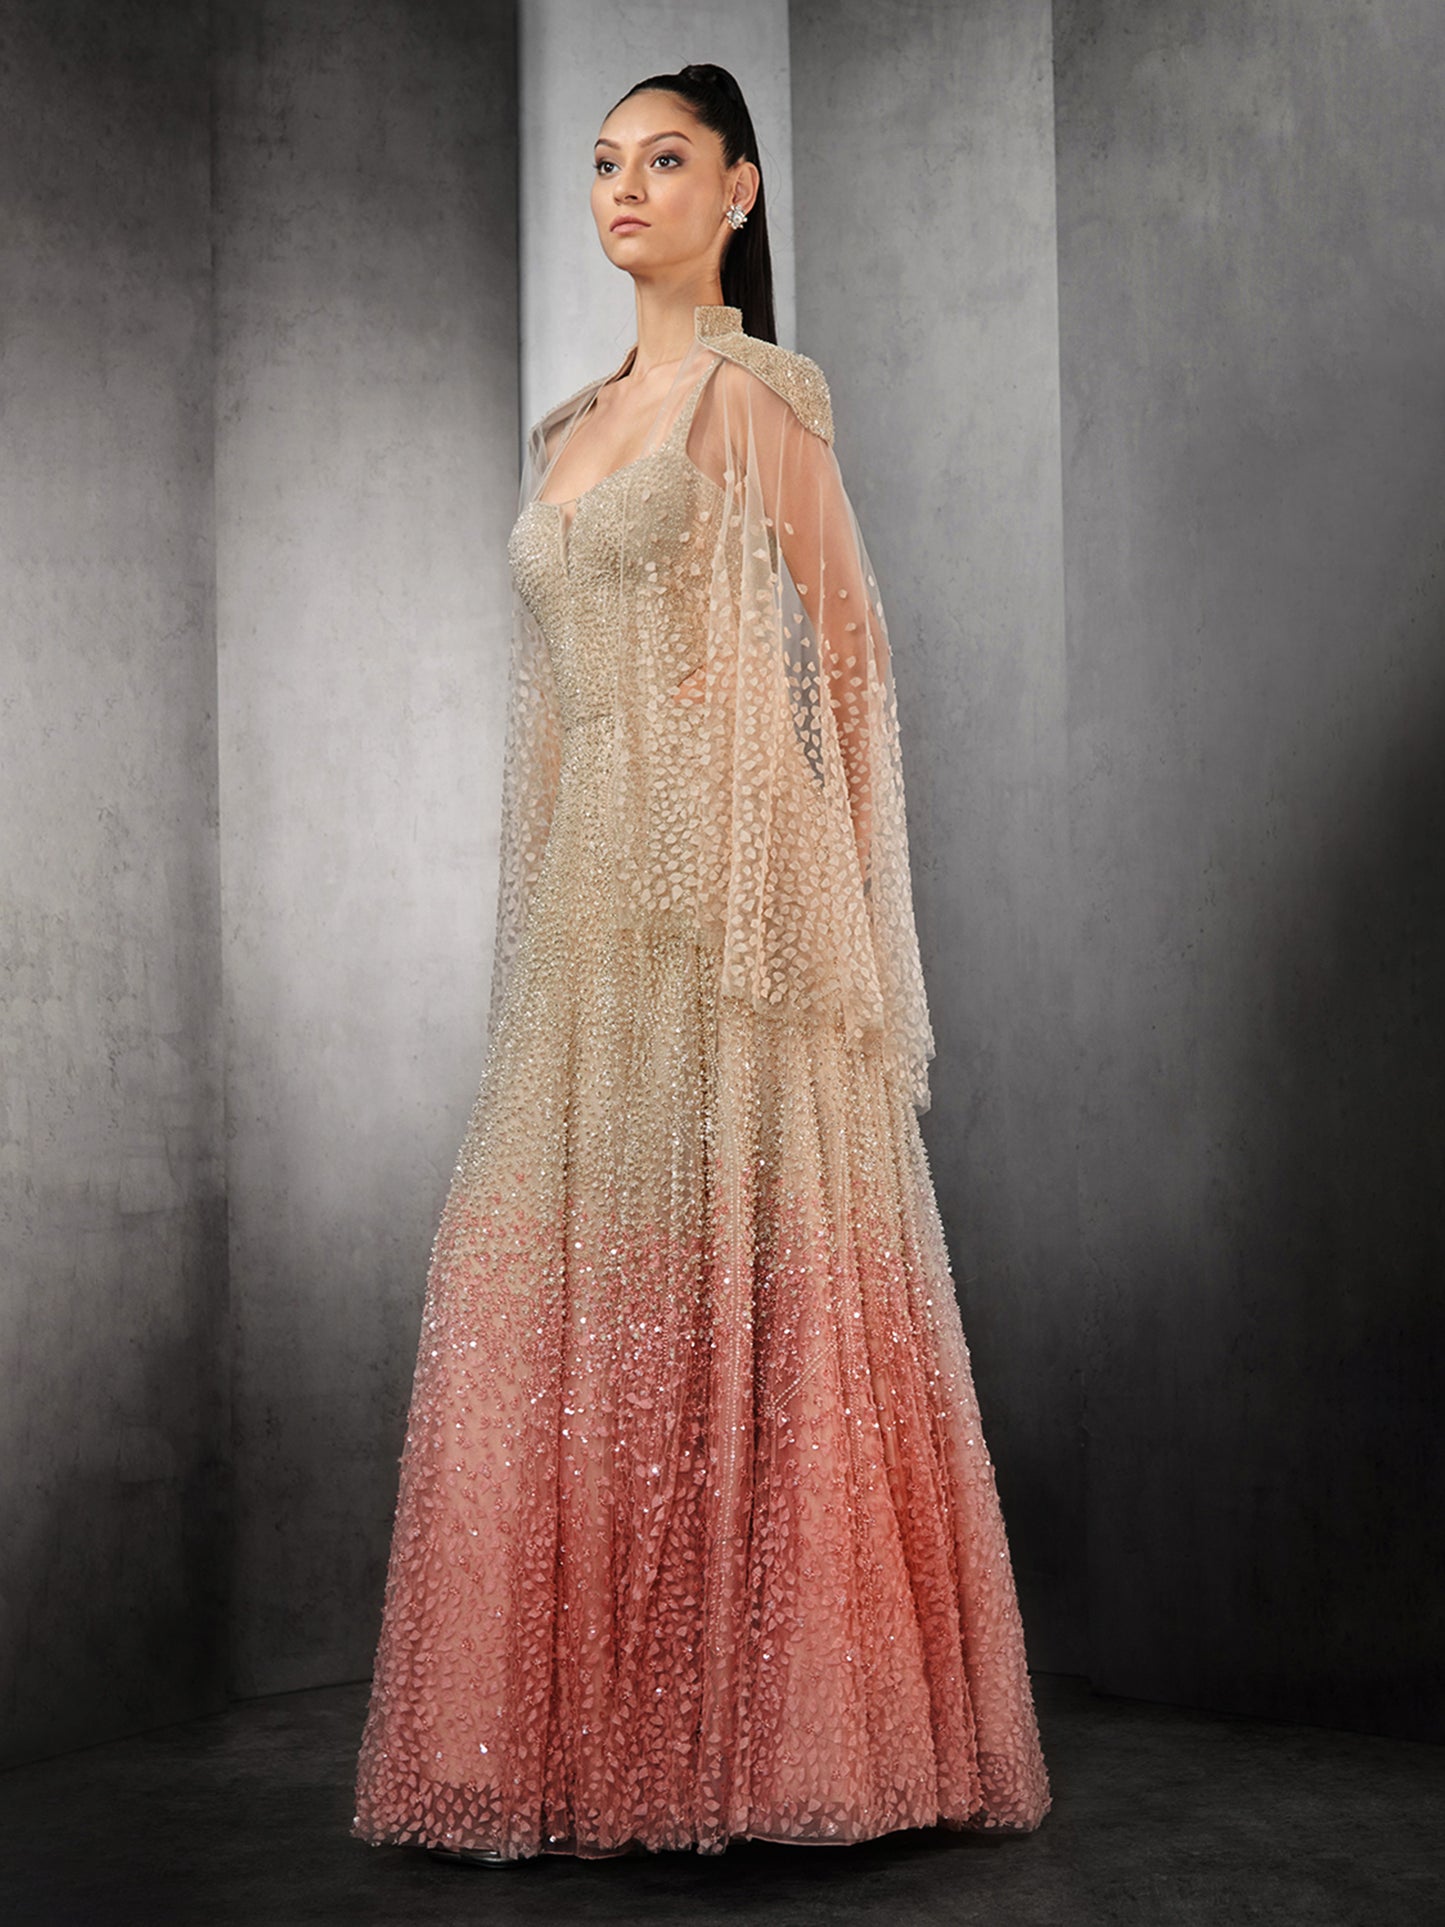 Ombre Embellished Gown With Cape